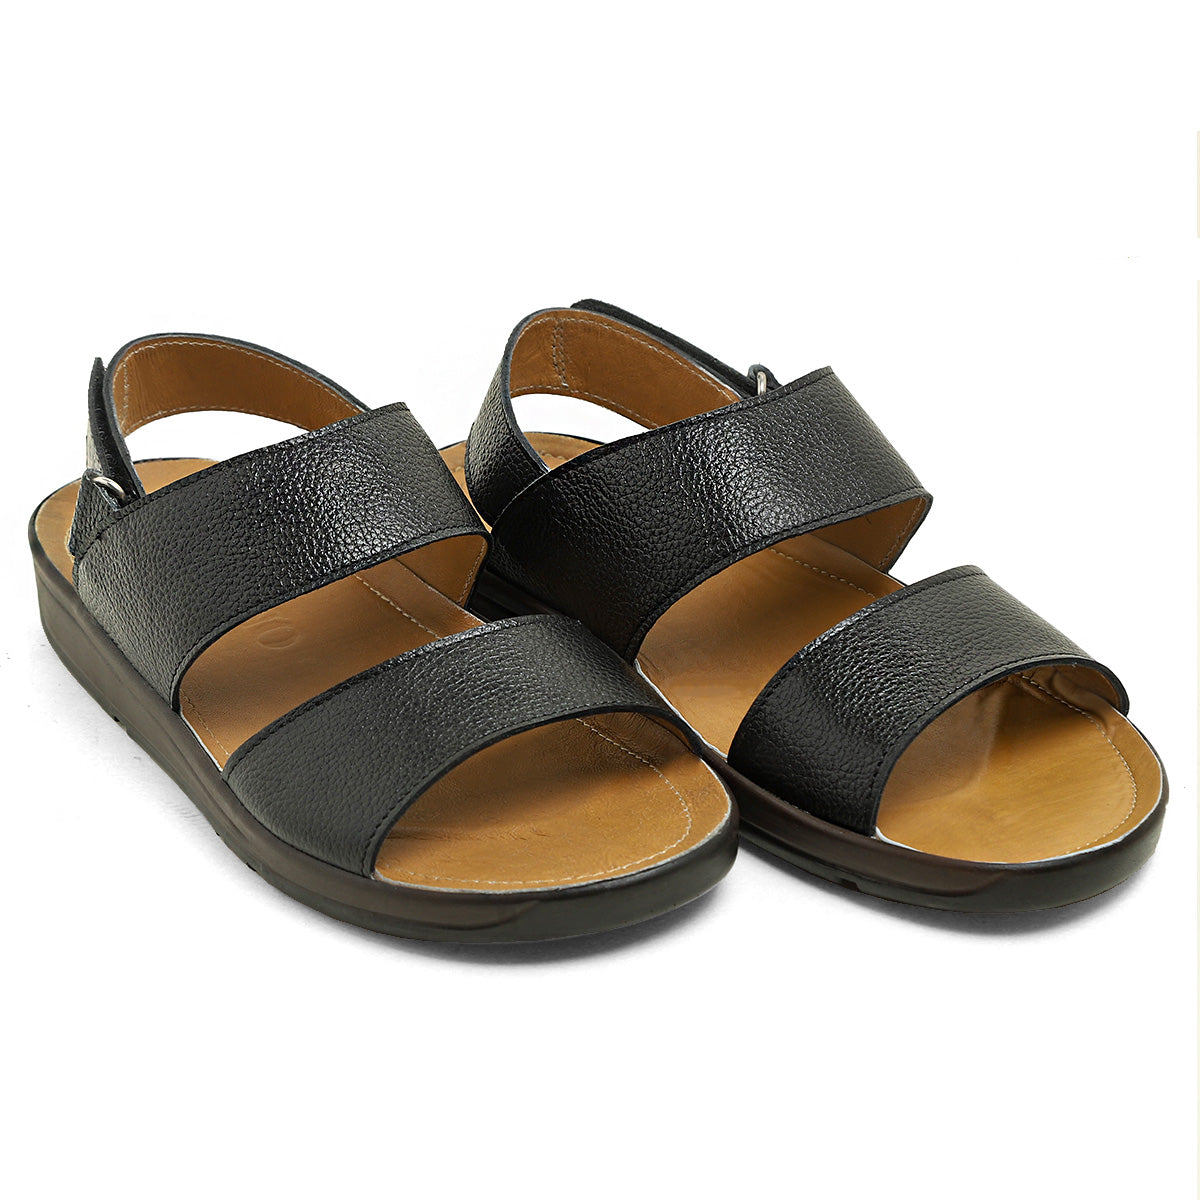 Maazu Leather Sandal For Men Price in Pakistan - View Latest Collection of Flip  Flops